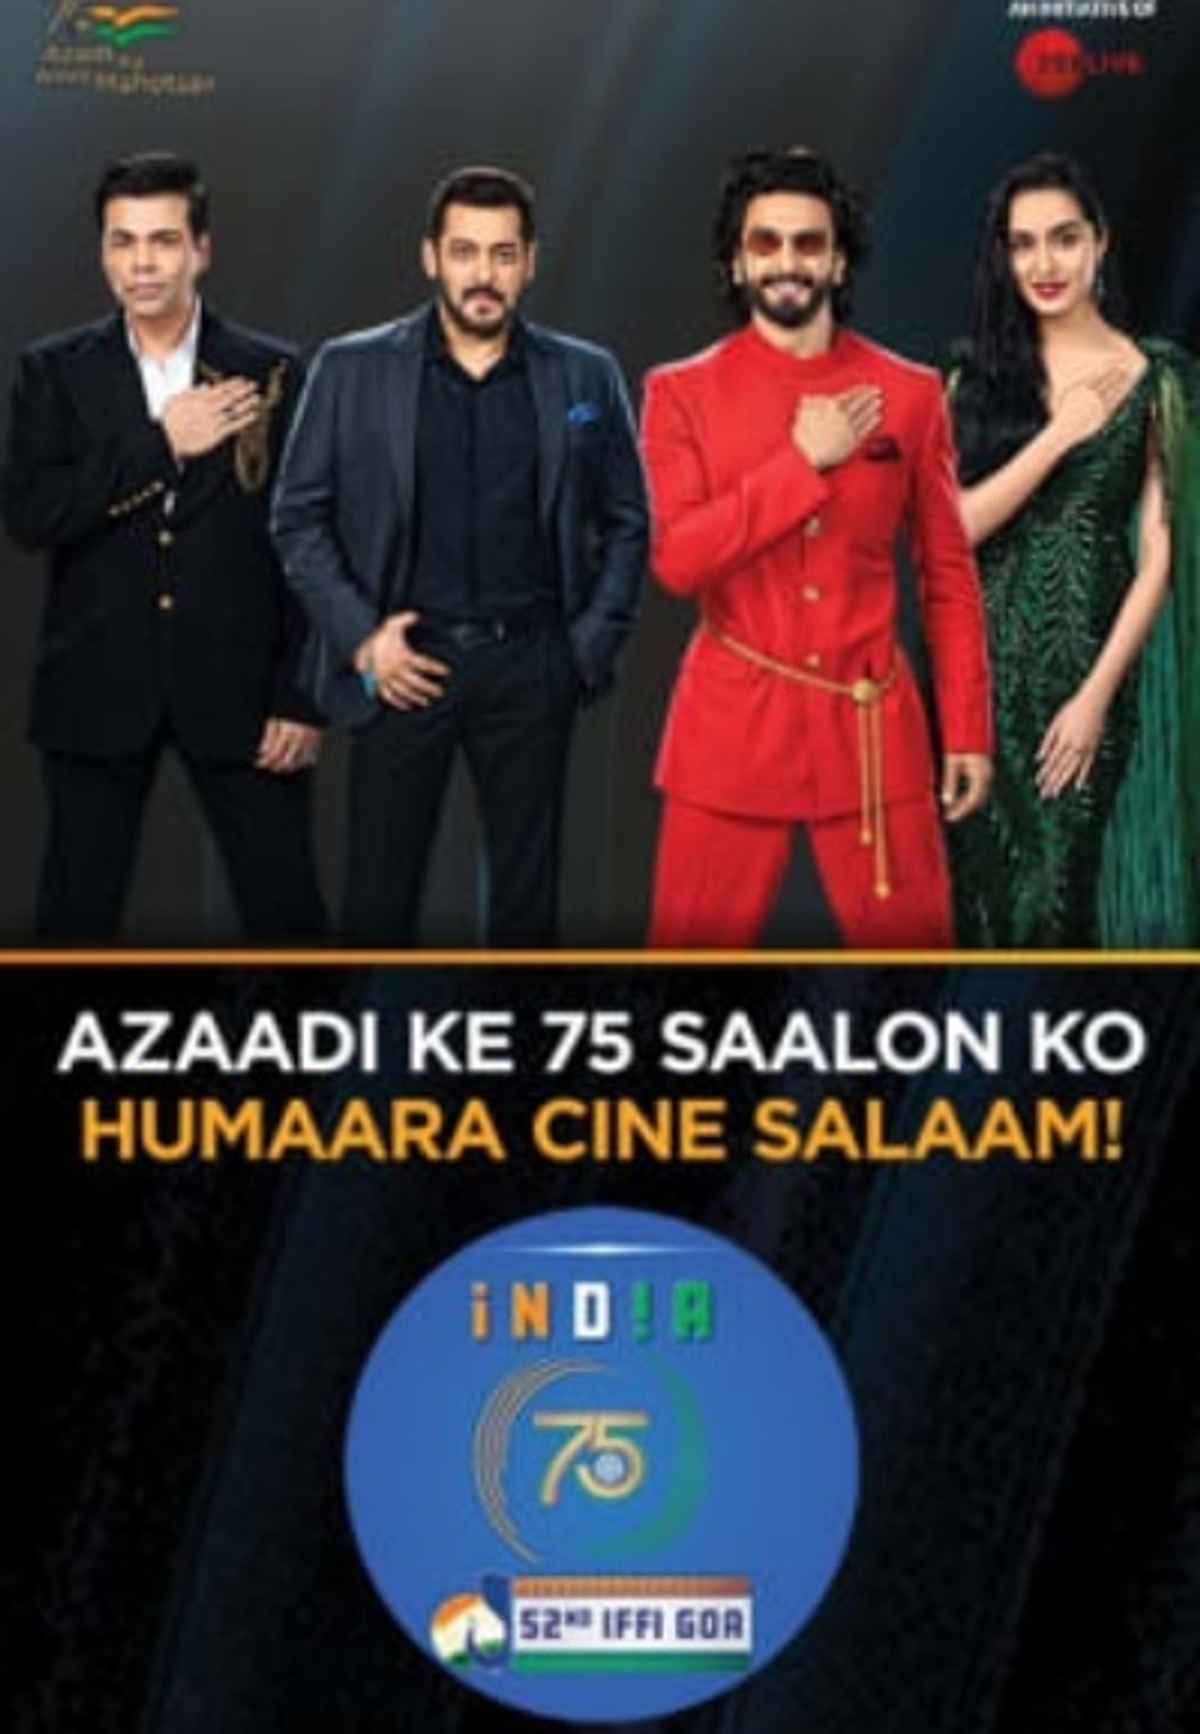 India 75 at 52nd International Film Festival of India